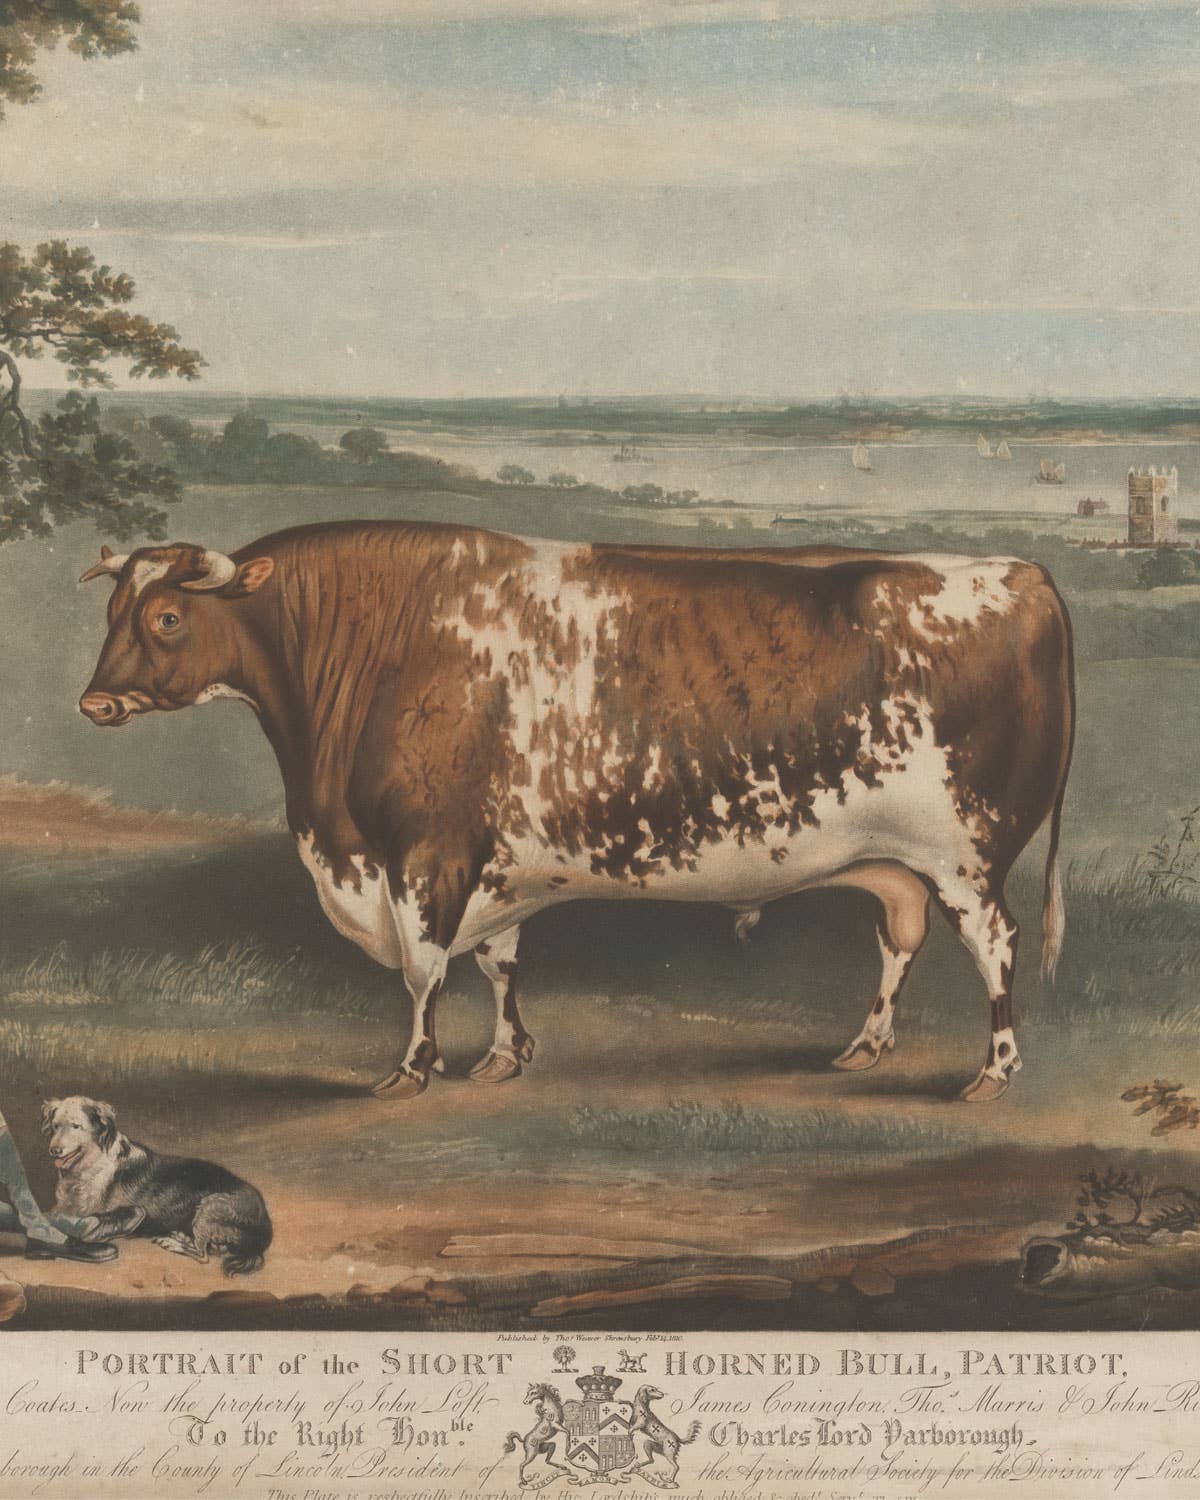 These Livestock Portraits Were the Ultimate Displays of Wealth in 19th-Century Britain